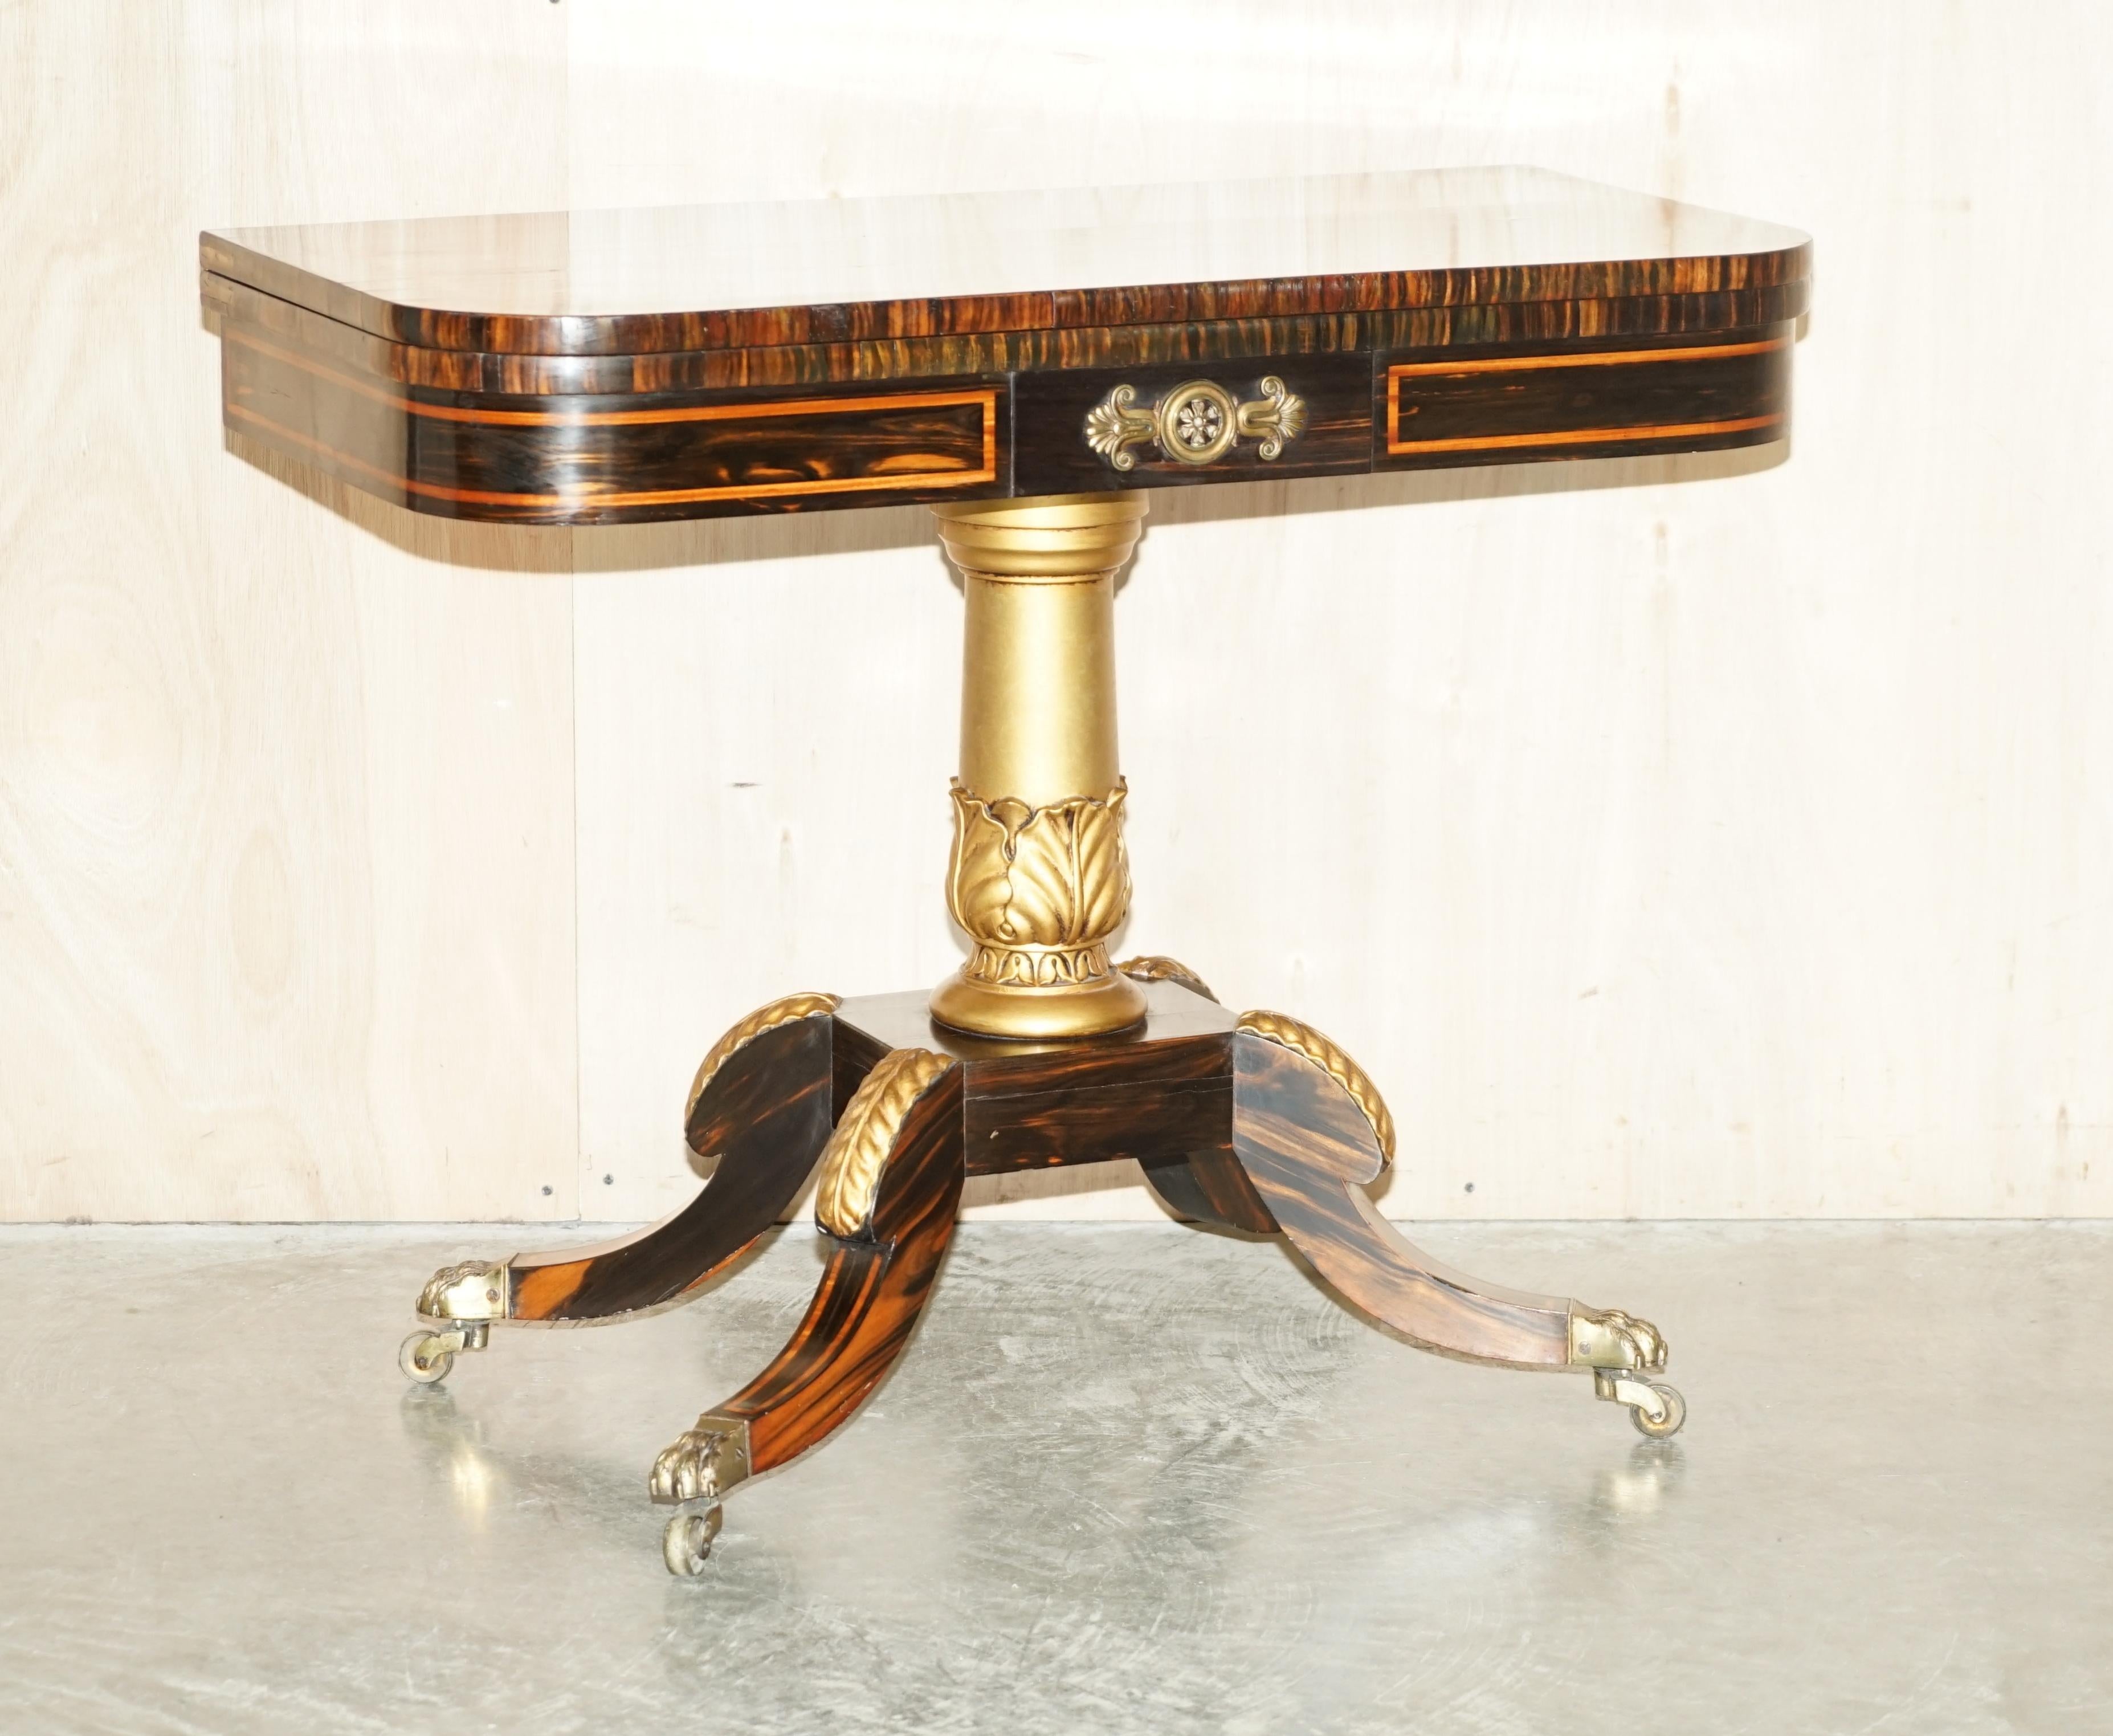 Royal House Antiques

Royal House Antiques is delighted to offer for sale this exquisite, fully restored, hand made in England William IV circa 1830 Coromandel & Giltwood occasional table with baize lined card top inside 

A very rare example,